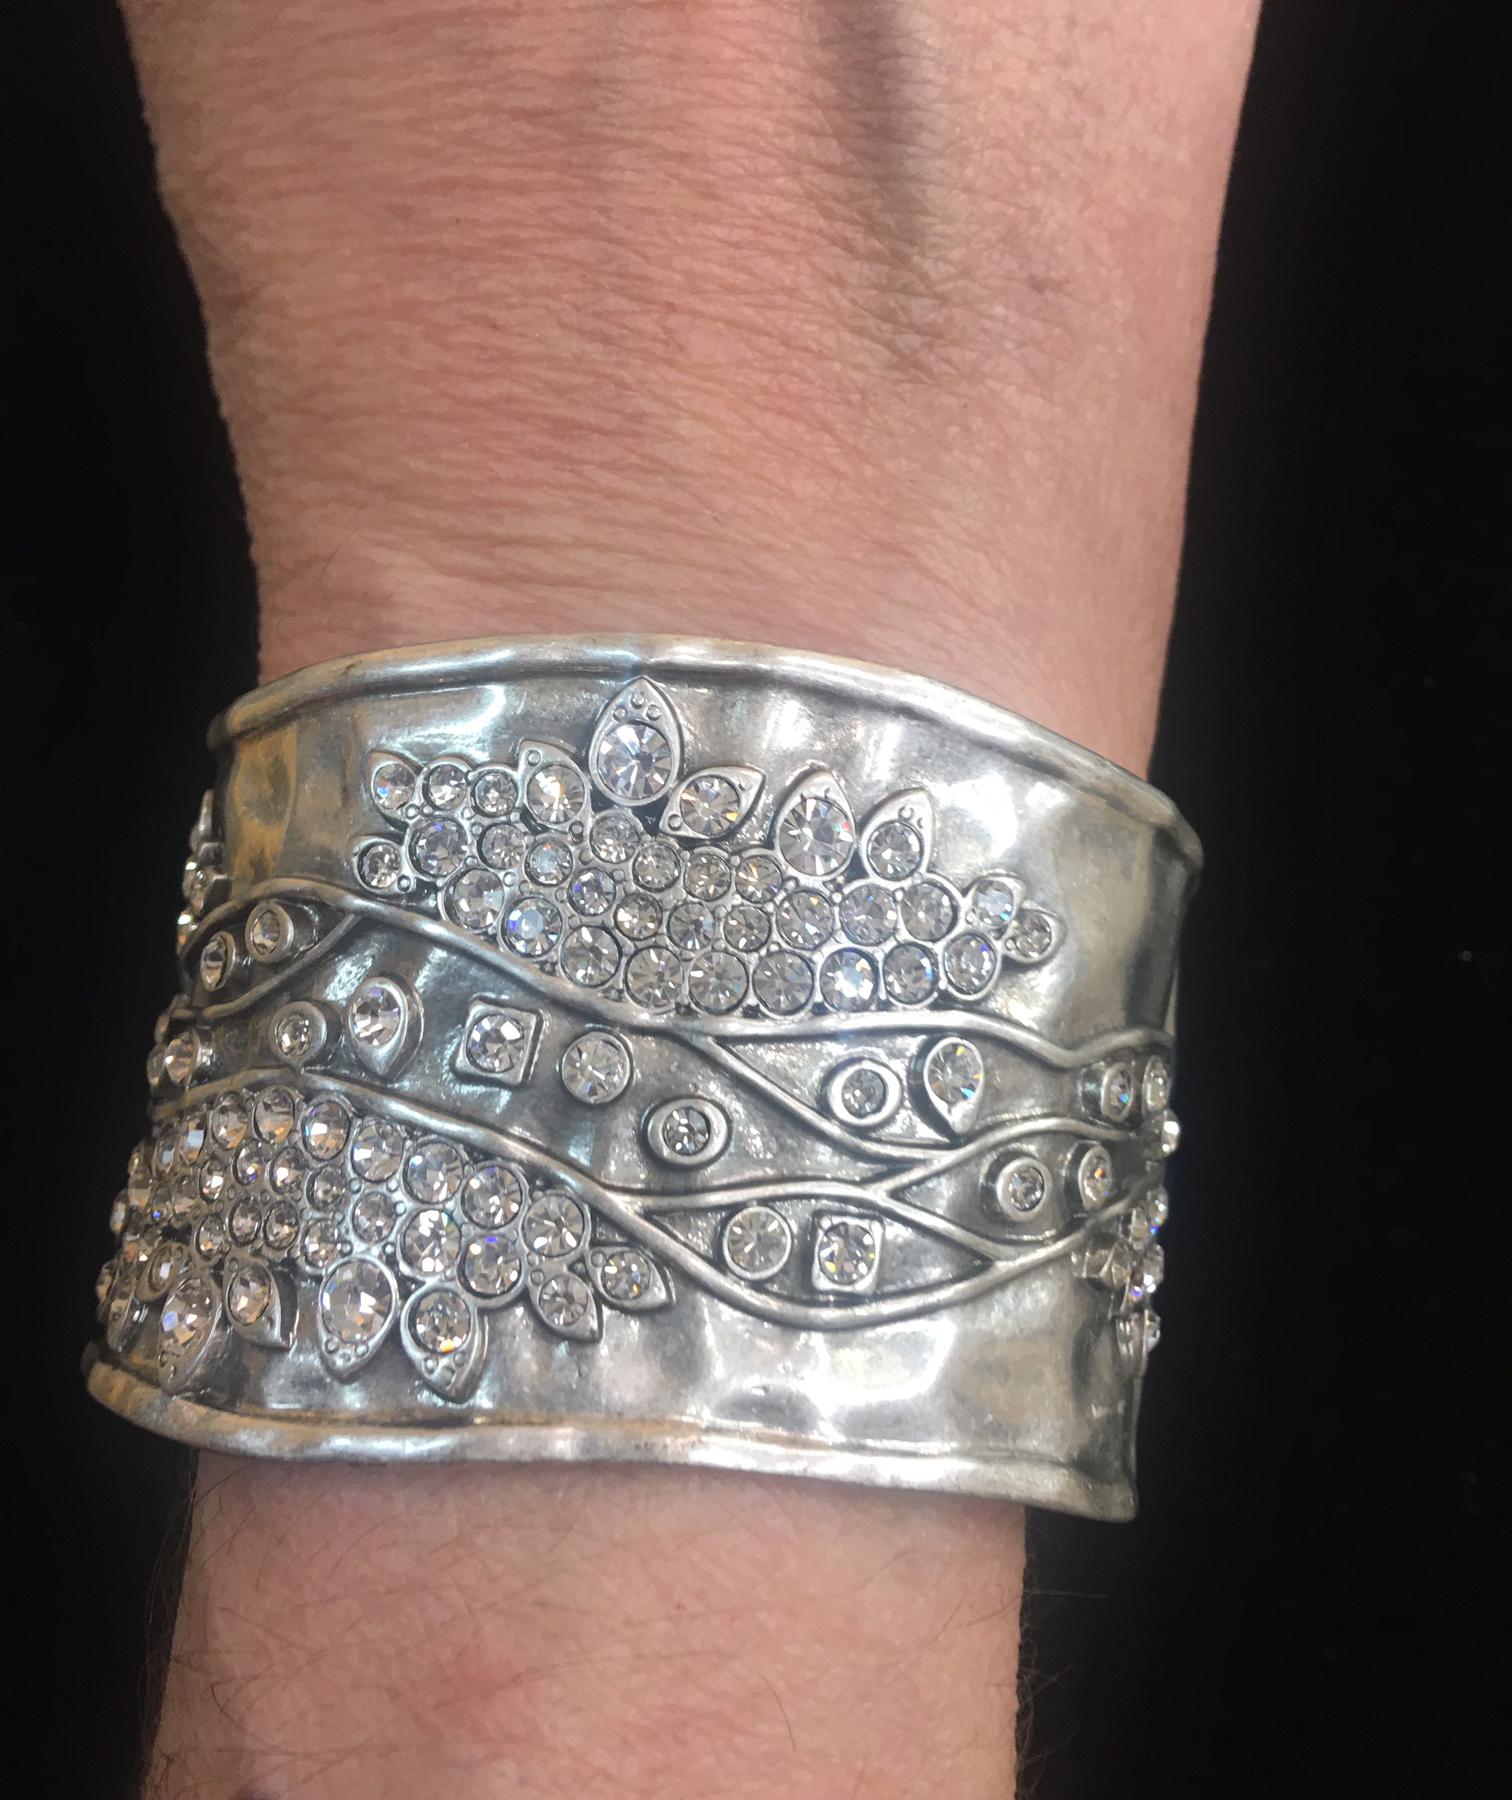 Stunning Sparkling Crystal Hinged Cuff Bracelet. Front and back set with Sparkling Crystals in eye catching abstract design. Silver tone mounting. The camera didn't capture the beautiful Sparkle. So much More Beautiful in real time! Add pizazz to